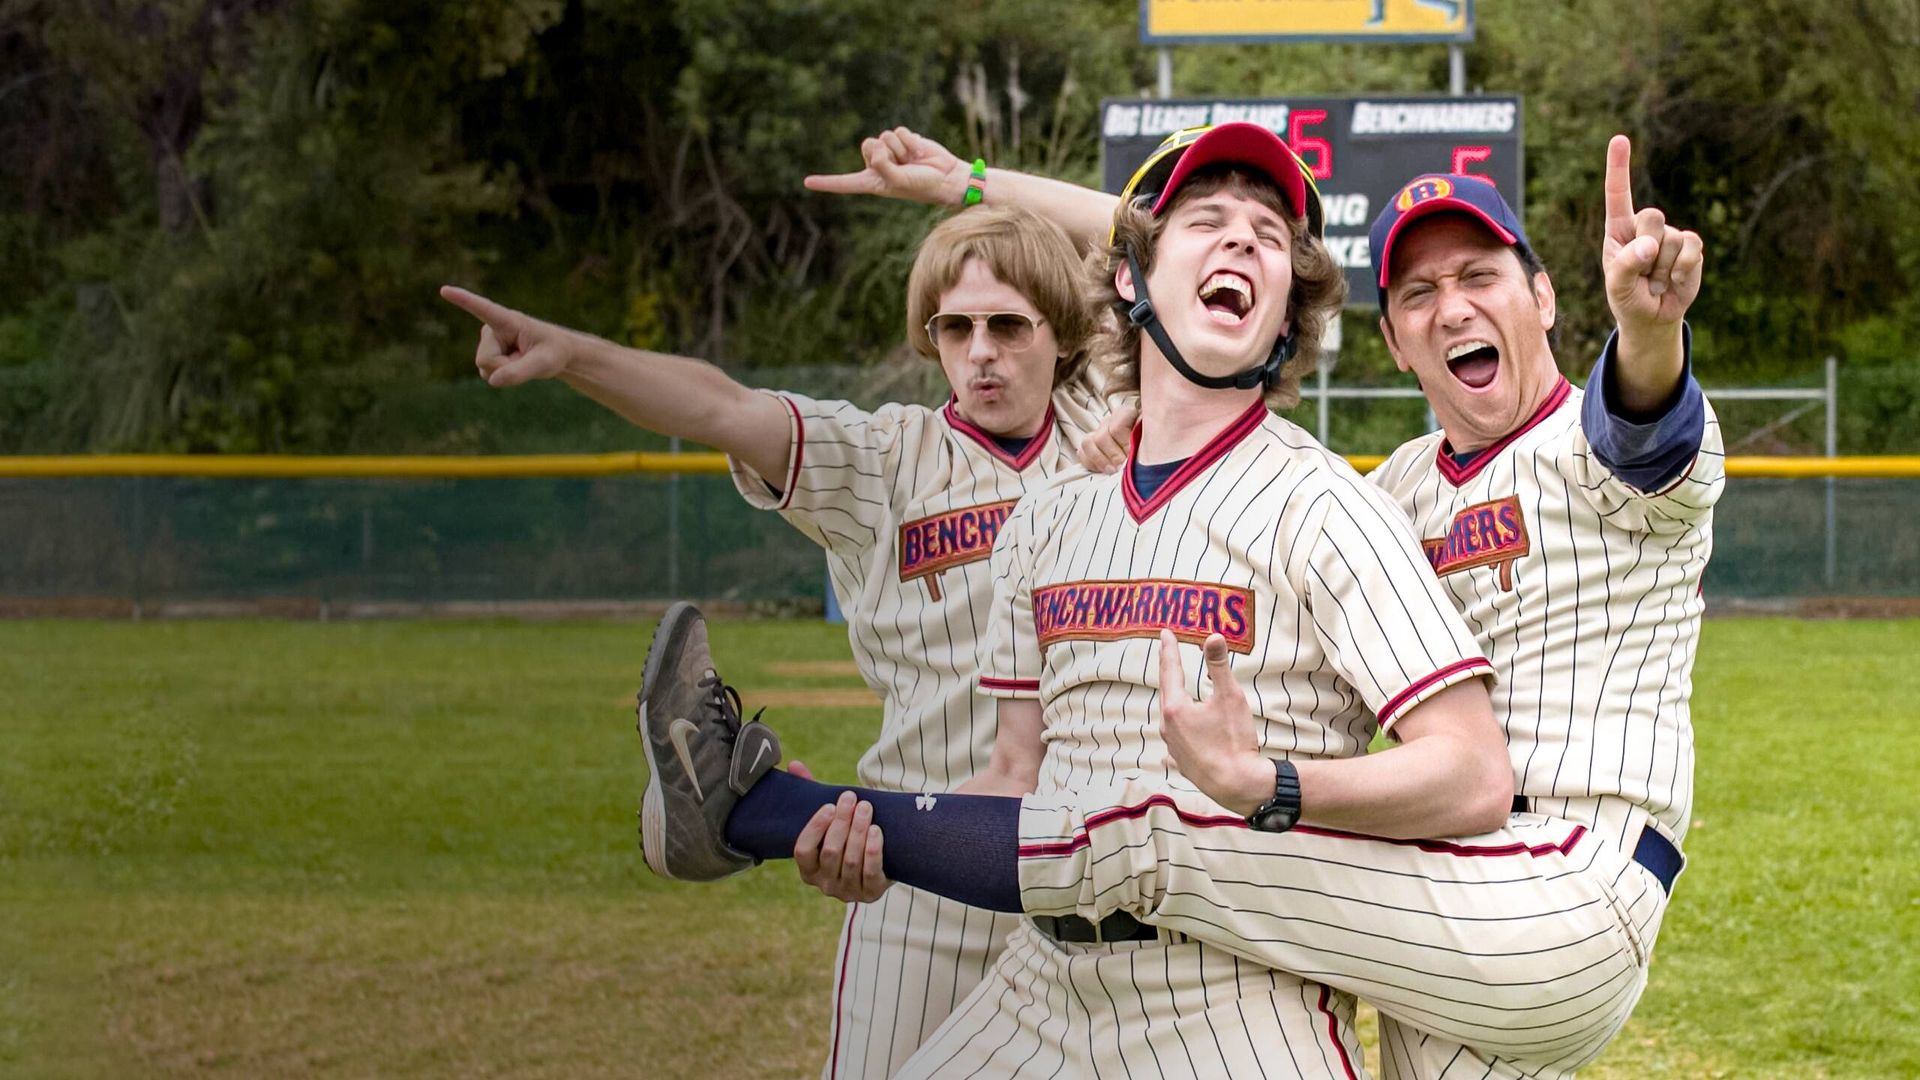 The Benchwarmers Backdrop